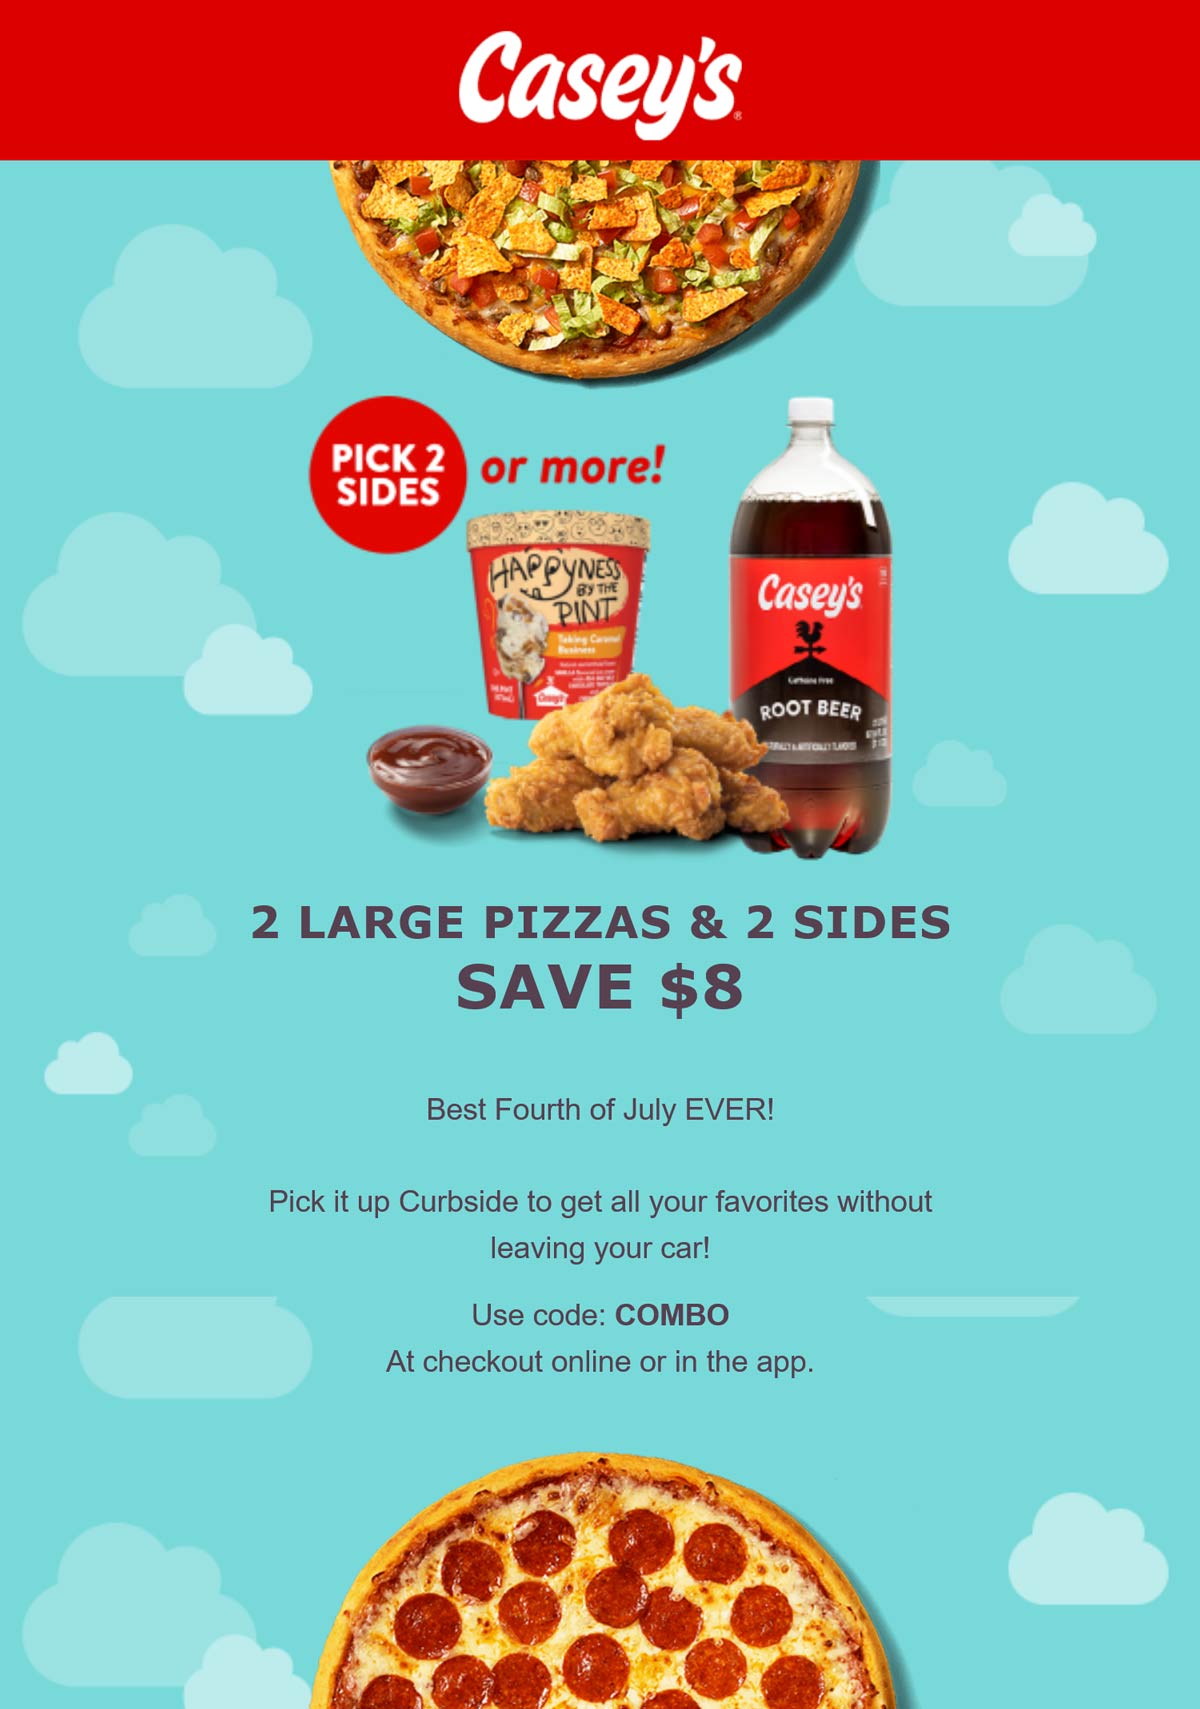 Caseys restaurants Coupon  $8 off 2 pizzas & sides today at Caseys General Store gas stations via promo code COMBO #caseys 